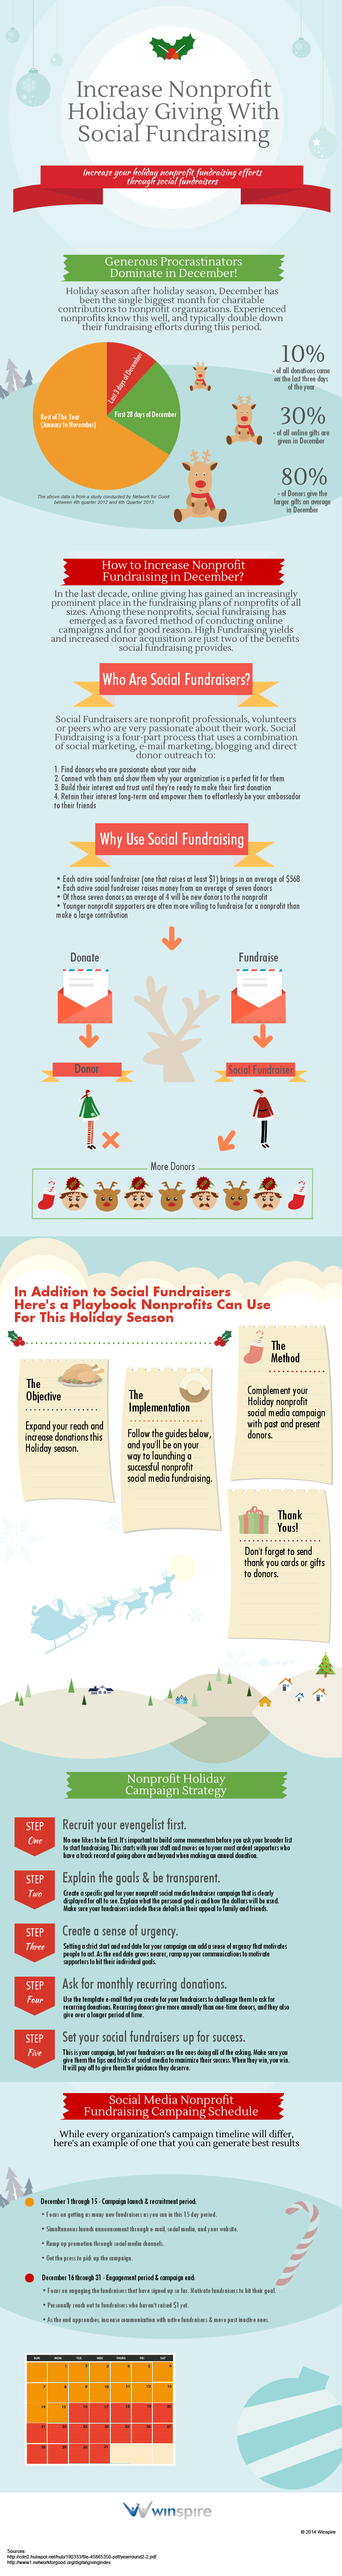 Increase Nonprofit Holiday Giving with Social Fundraising [INFOGRAPHIC]